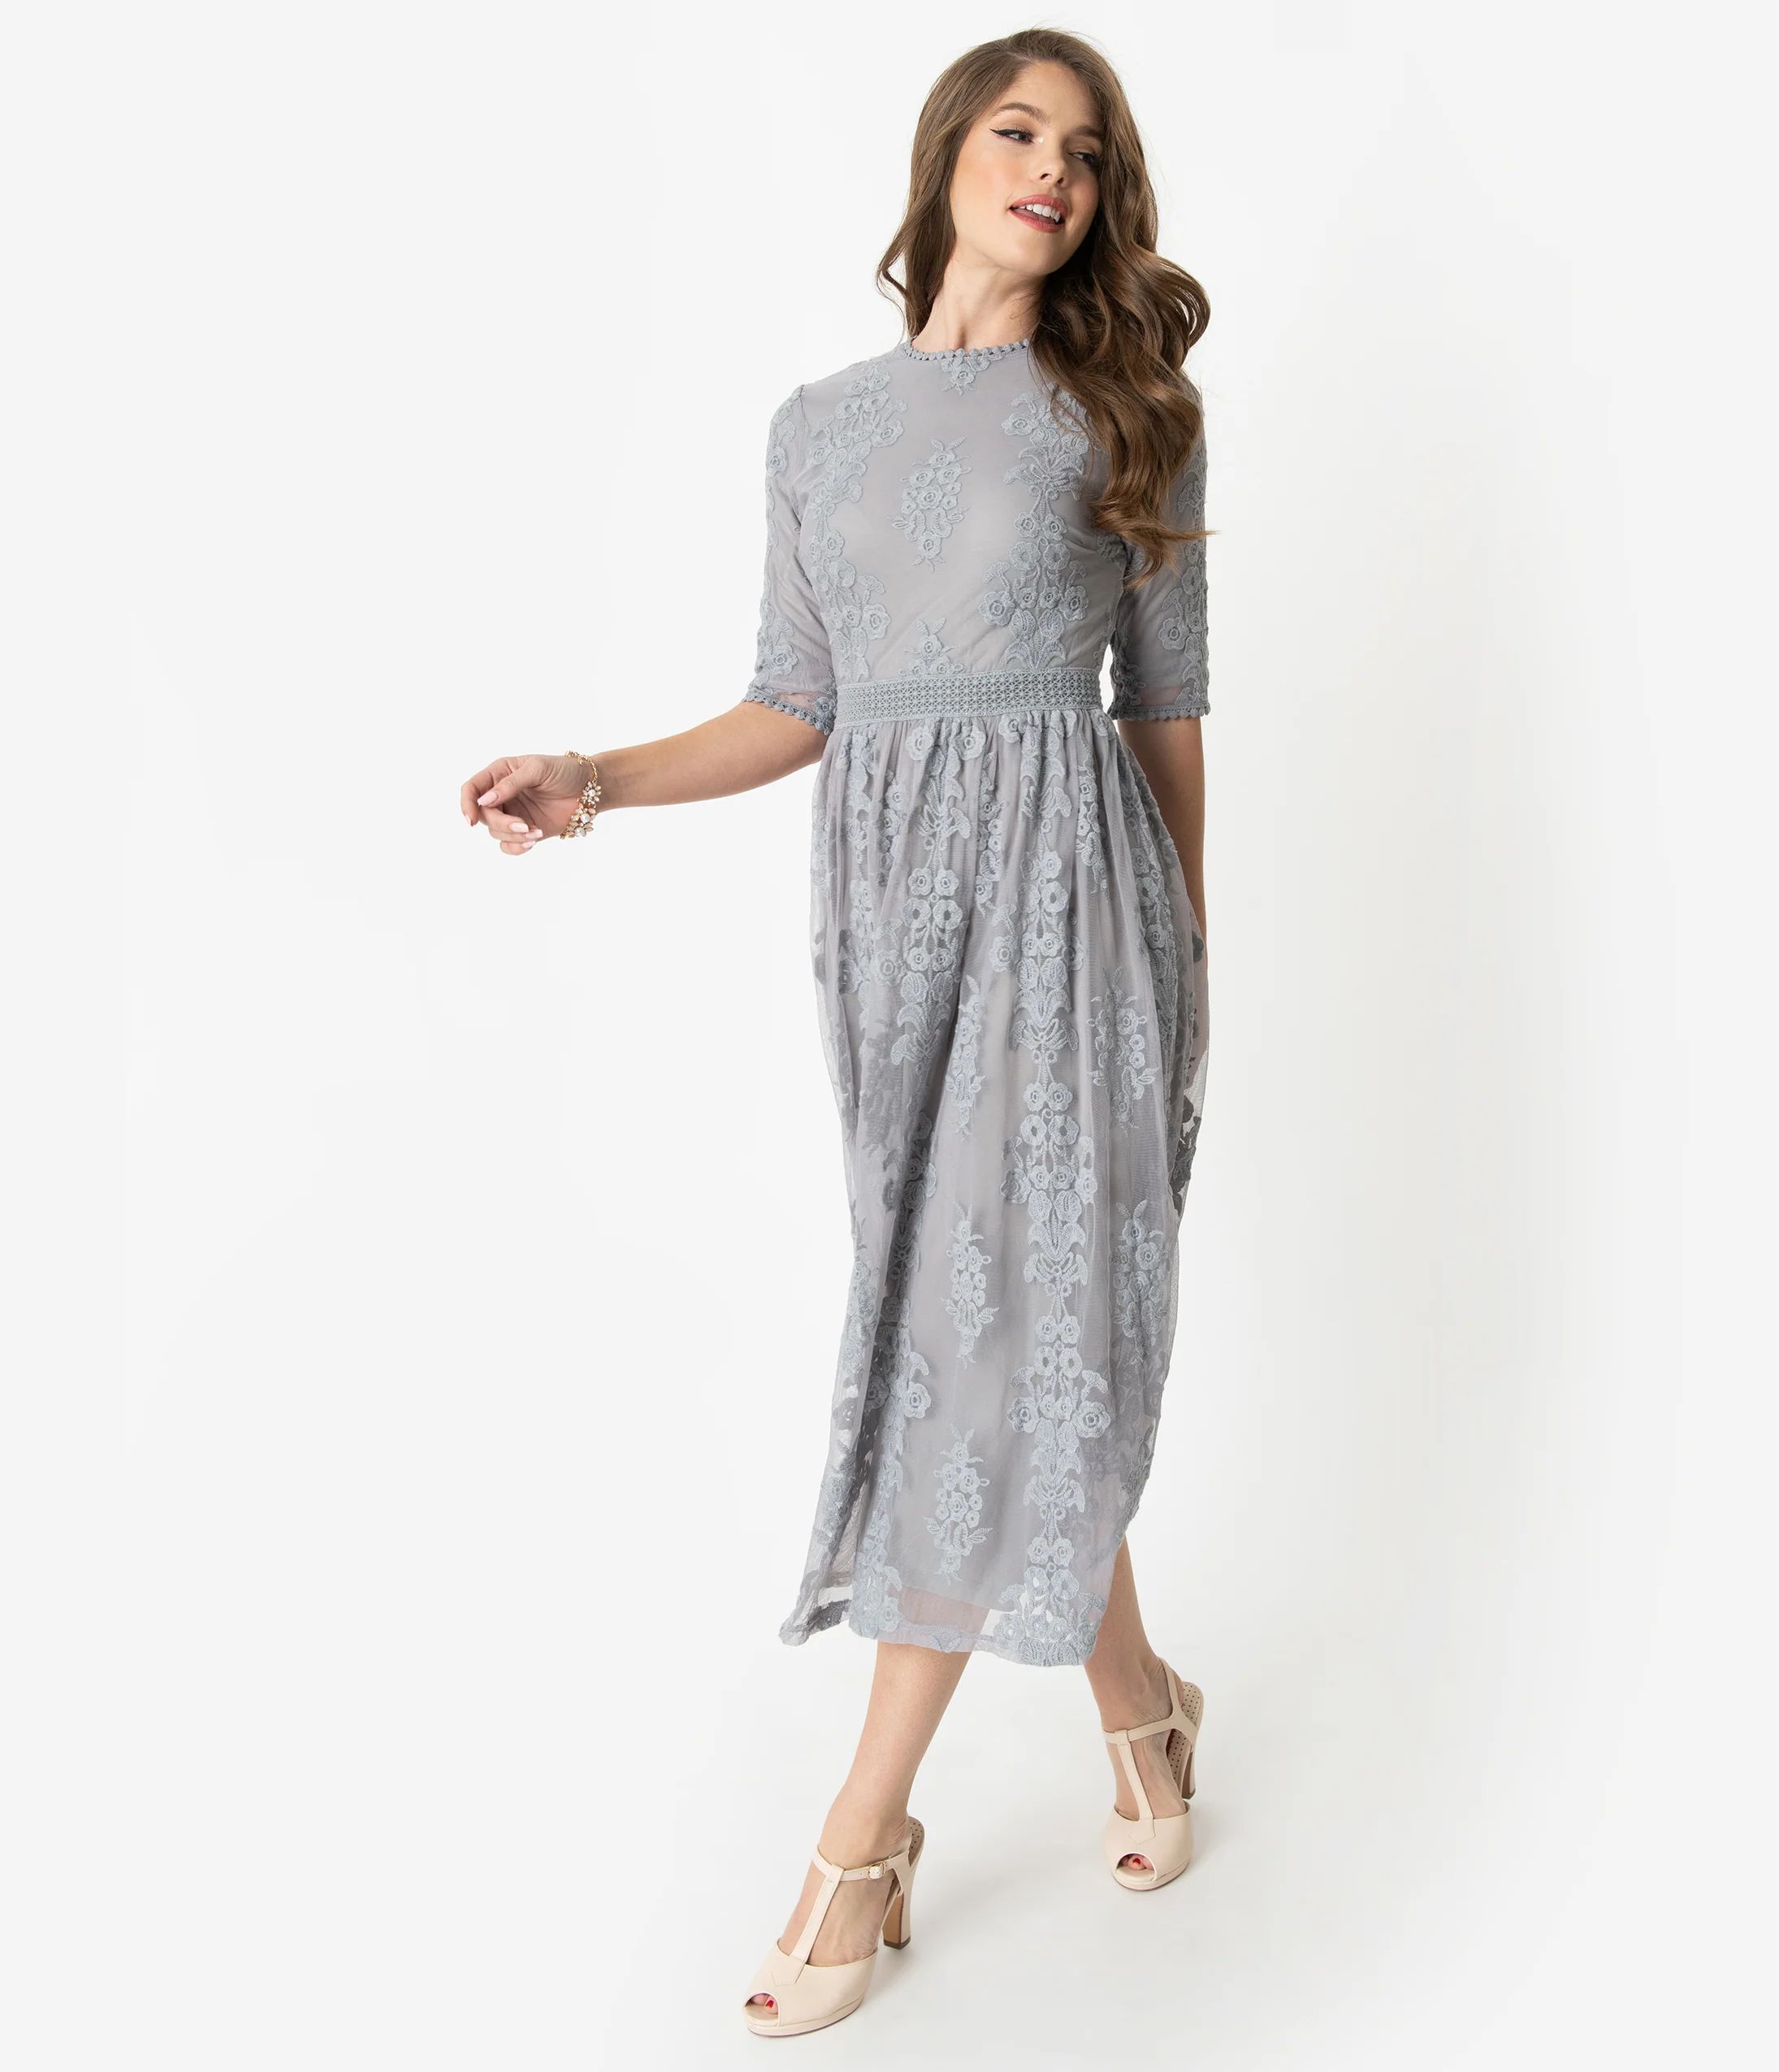 Vintage Style Silver Grey Embroidered Lace Modest Midi Dress | UniqueVintage